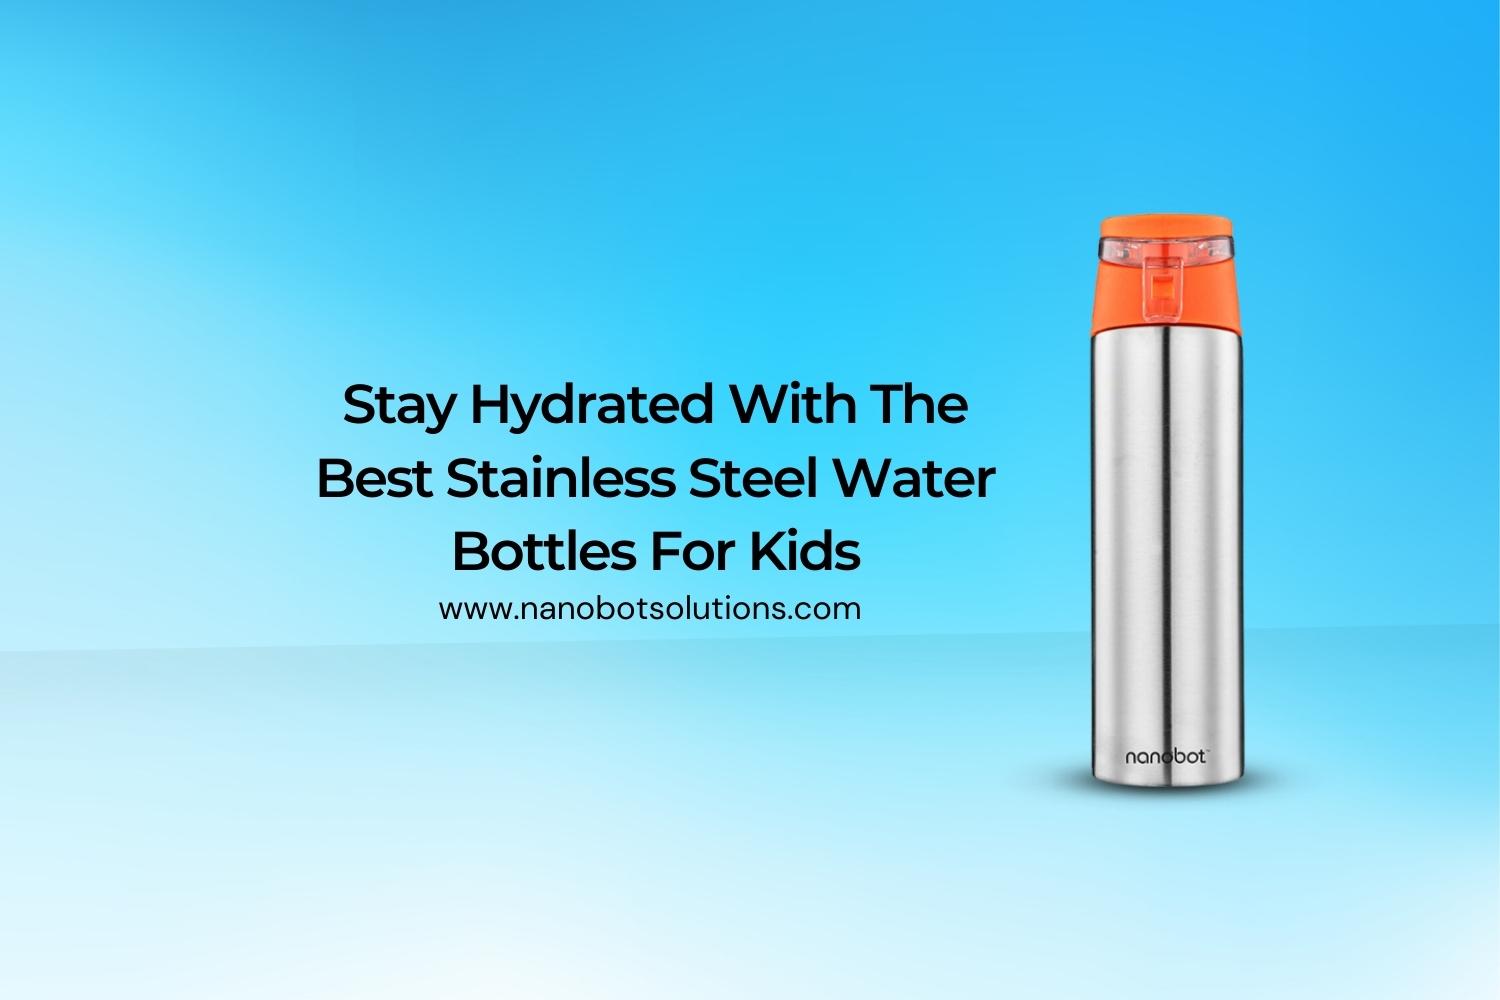 Stay Hydrated with the Best Stainless Steel Water Bottles for Kids | Nanobot